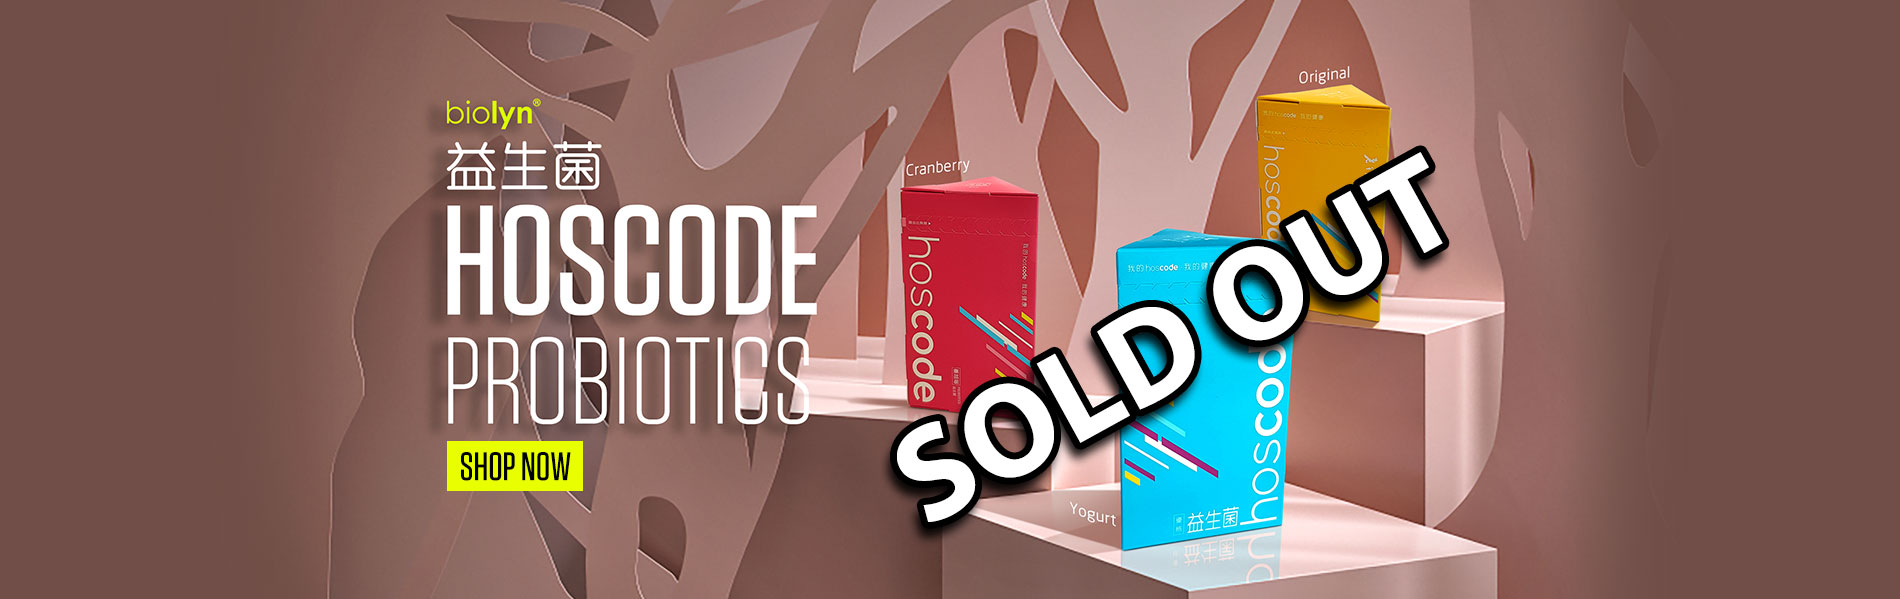 hoscode-sold-out_04_04